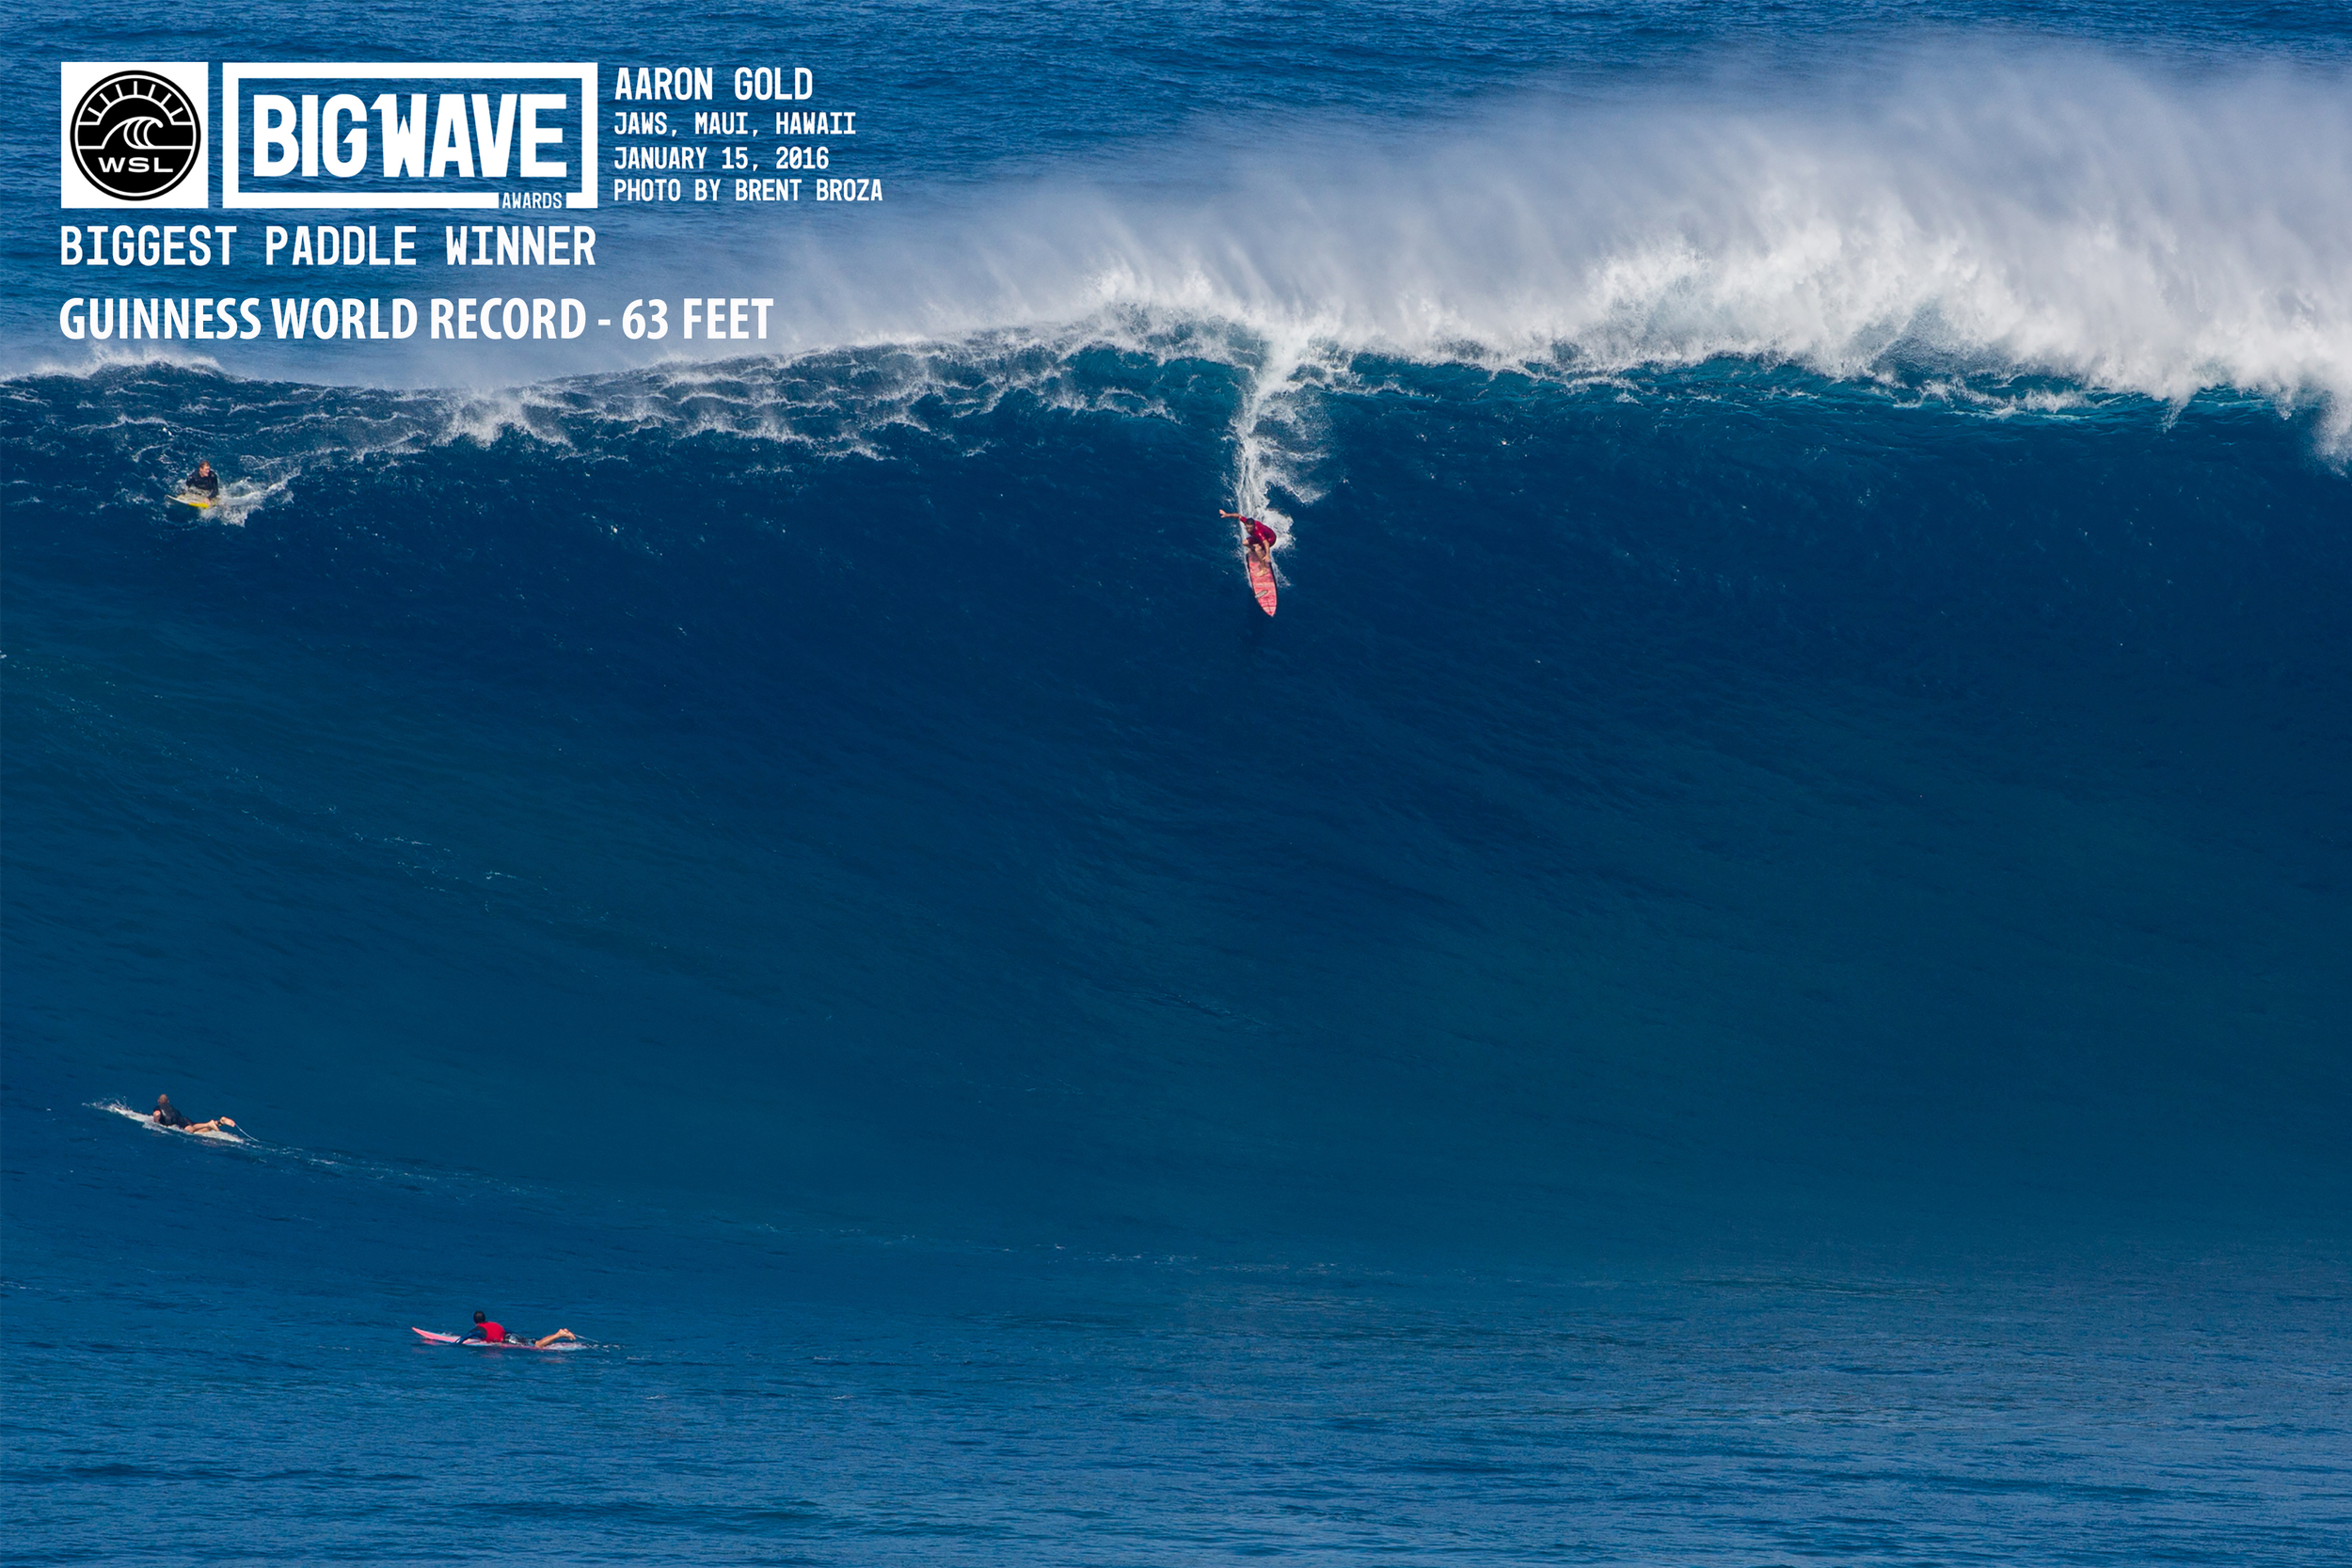 April 5, 2016 WSL Big Wave Awards -  Winning photo of Aaron Gold for the biggest wave ever paddled into by a surfer. New Guinness World Record at 63 feet.